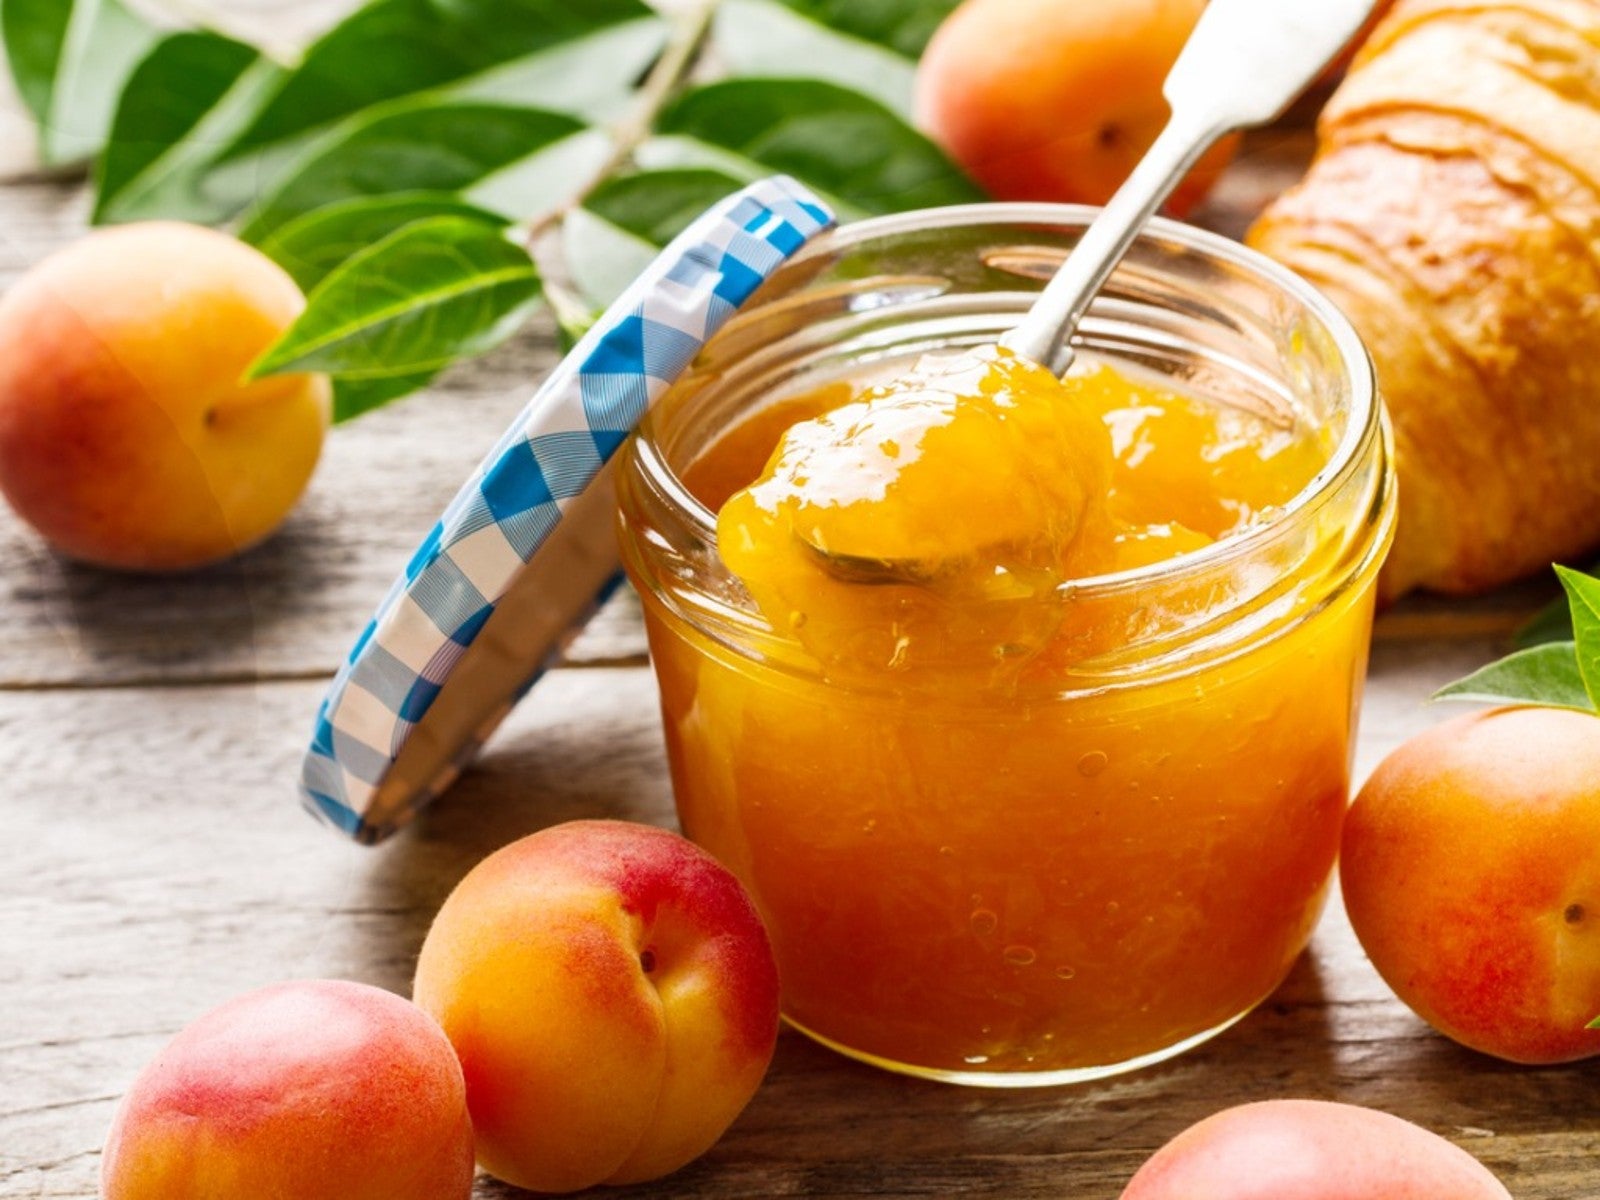 An open jar of apricot preserves surrounded by several whole ripe apricots